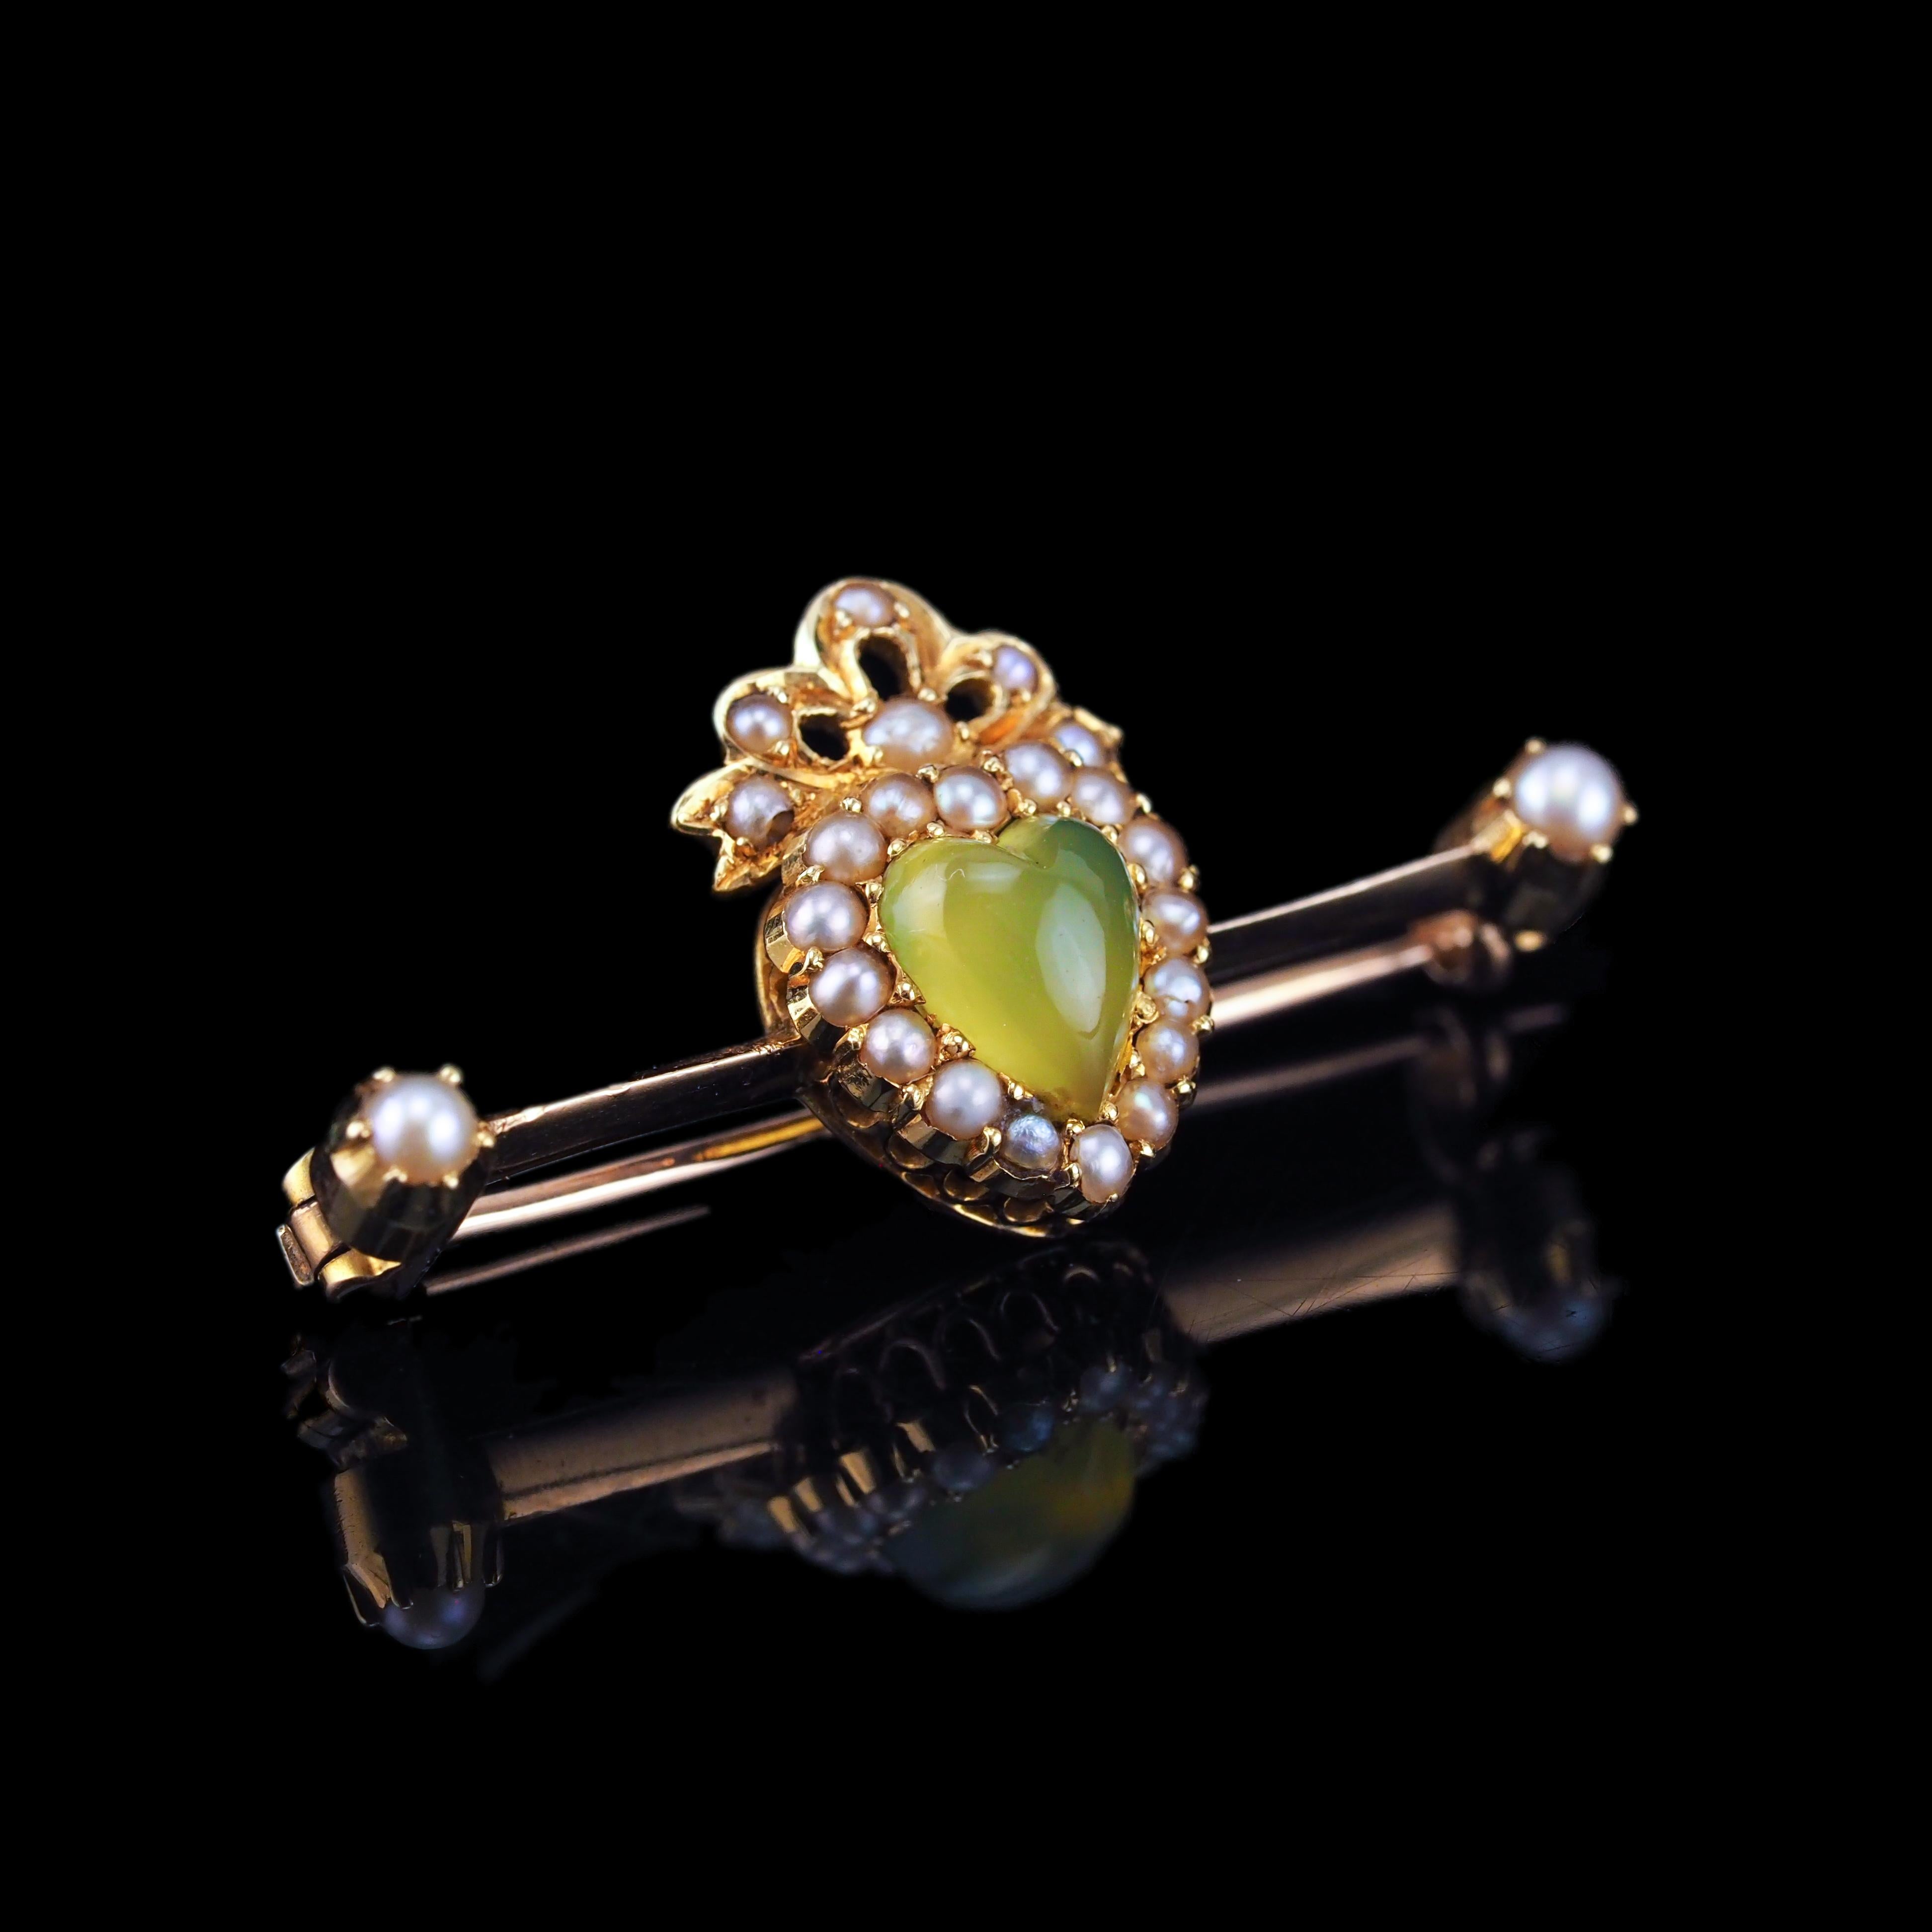 Cabochon Antique Victorian Chalcedony Brooch  Seed Pearls 15K Gold Heart Shaped c.1890 For Sale